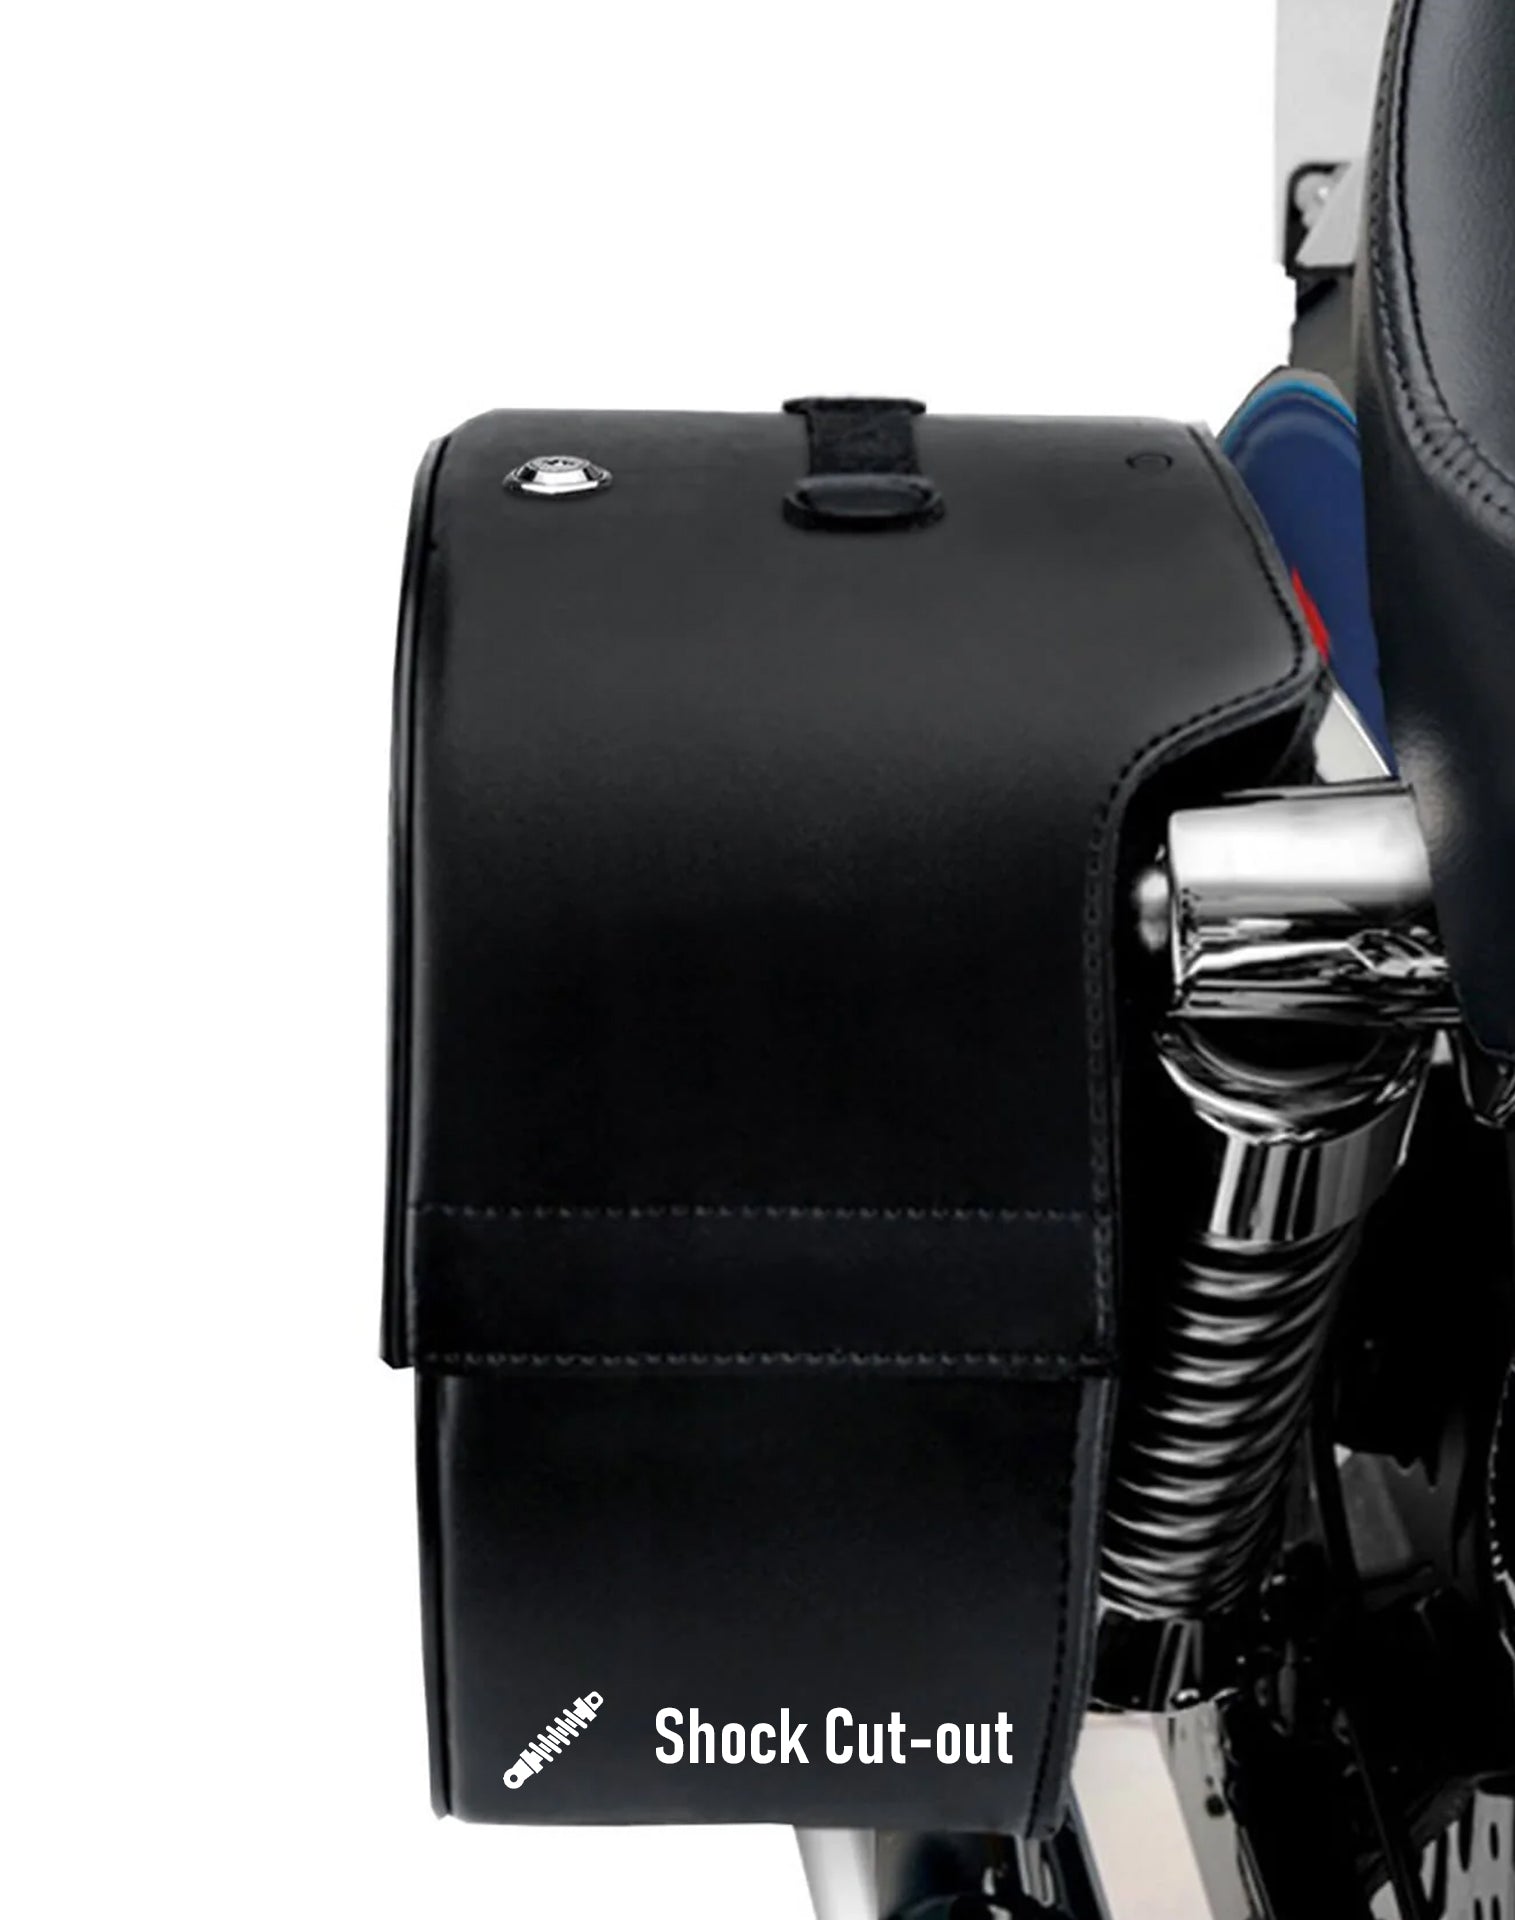 Viking Club Large Triumph Rocket Iii Classic Shock Cut Out Leather Motorcycle Saddlebags are Durable